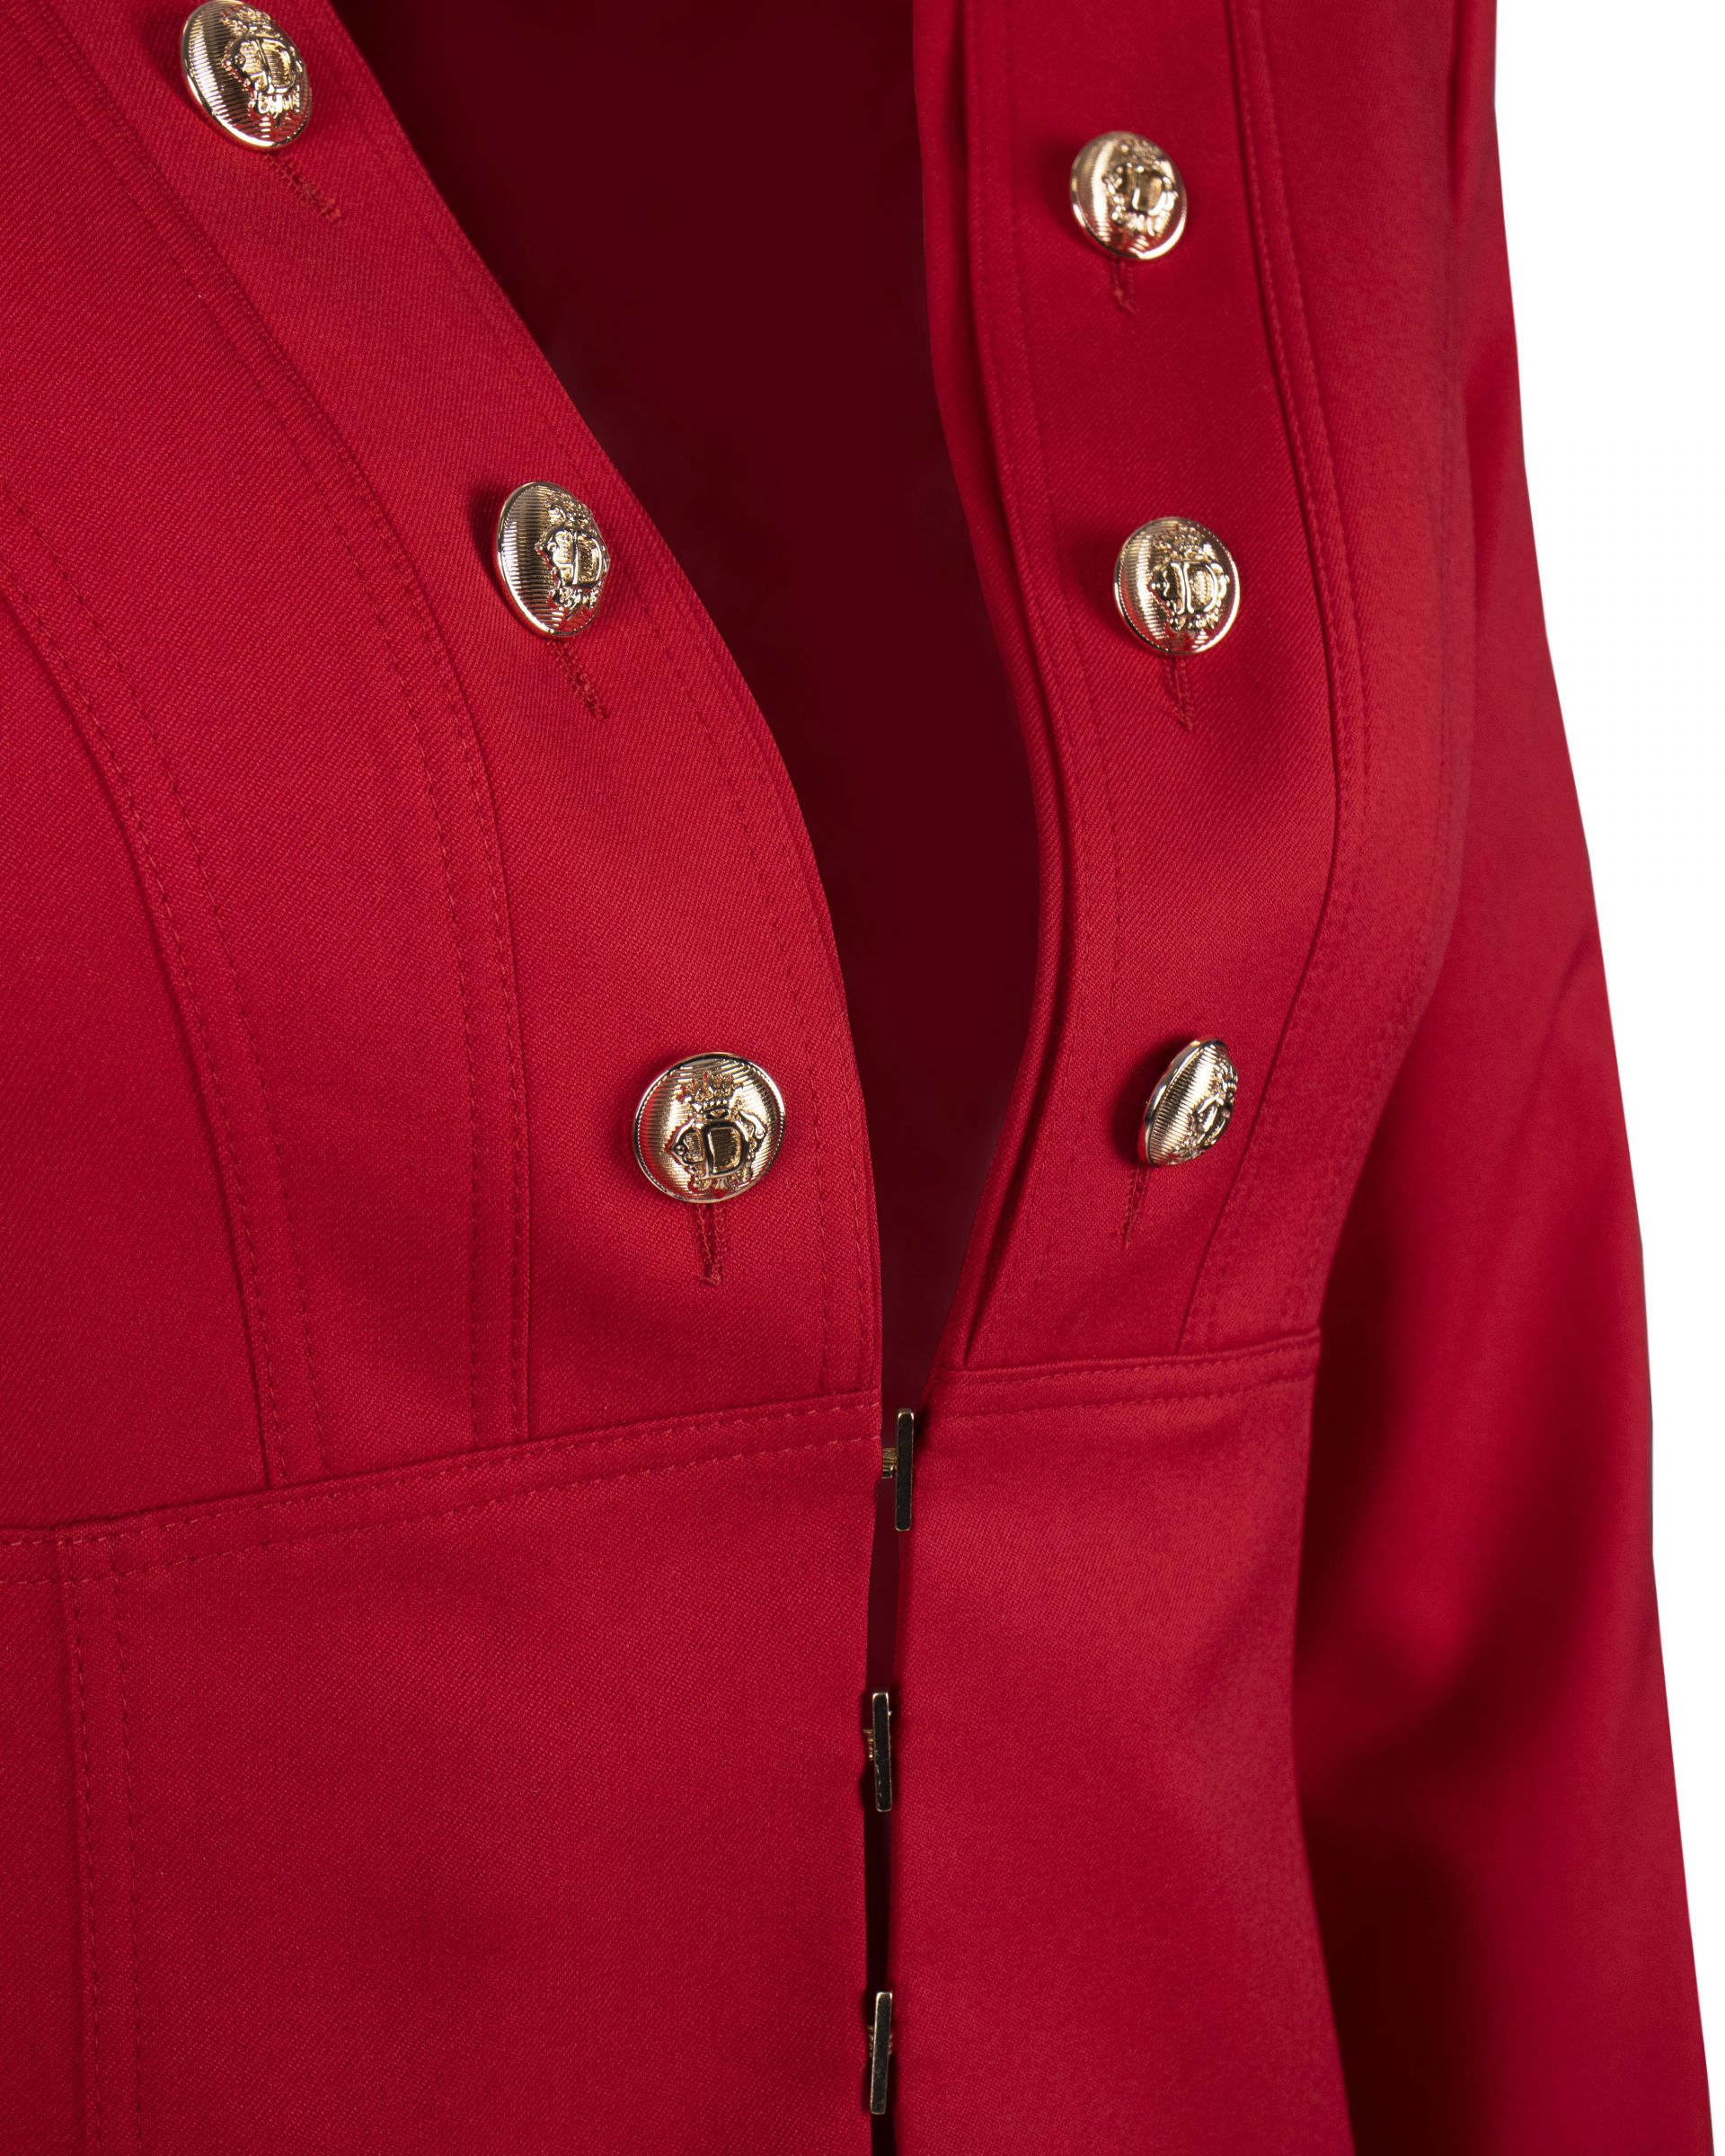 Fitted jacket without lapels, with decorative buttons 2